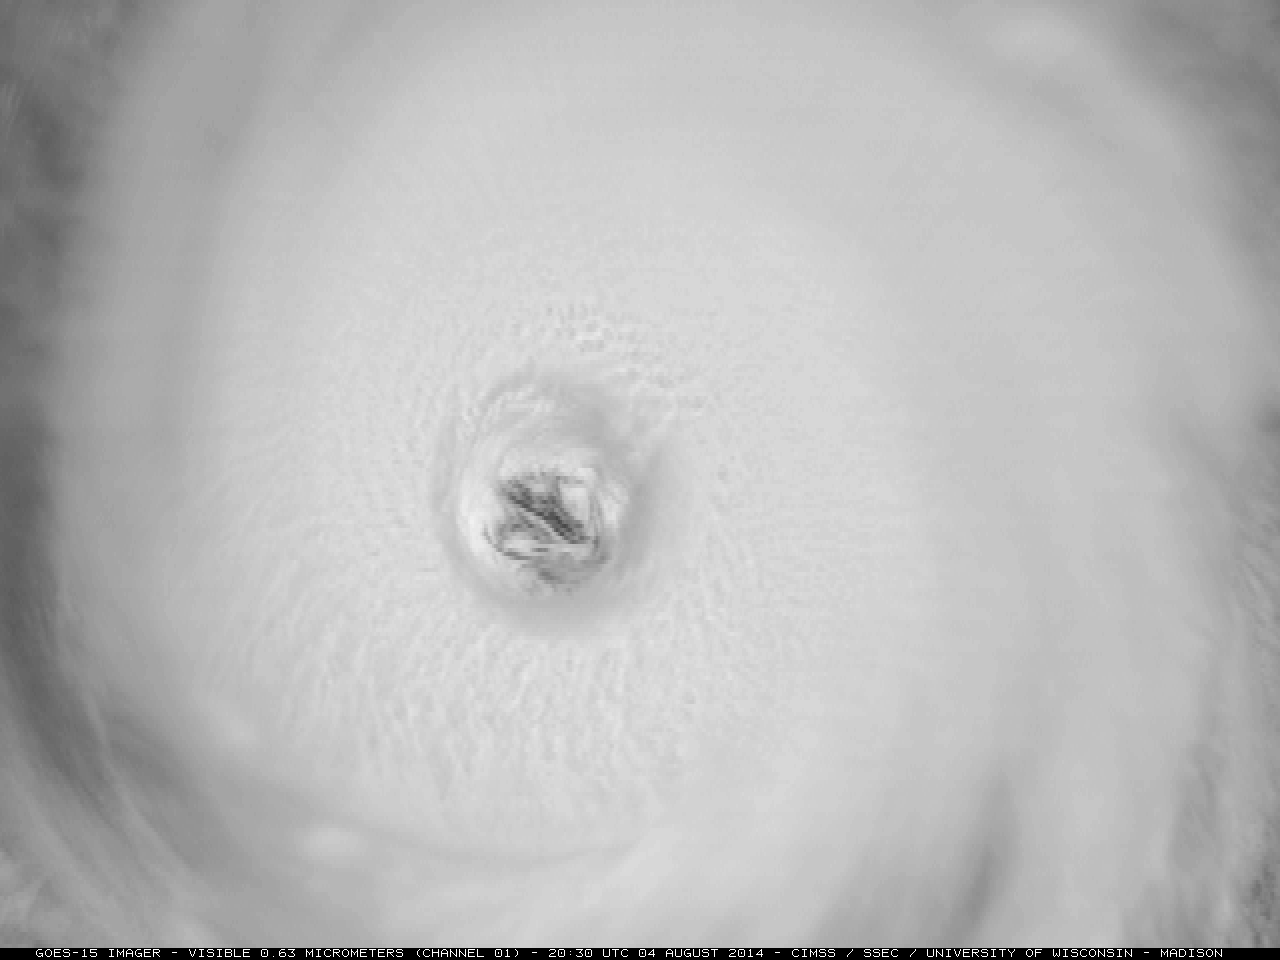 GOES-15 0.63 µm visible channel images (click to play animation)